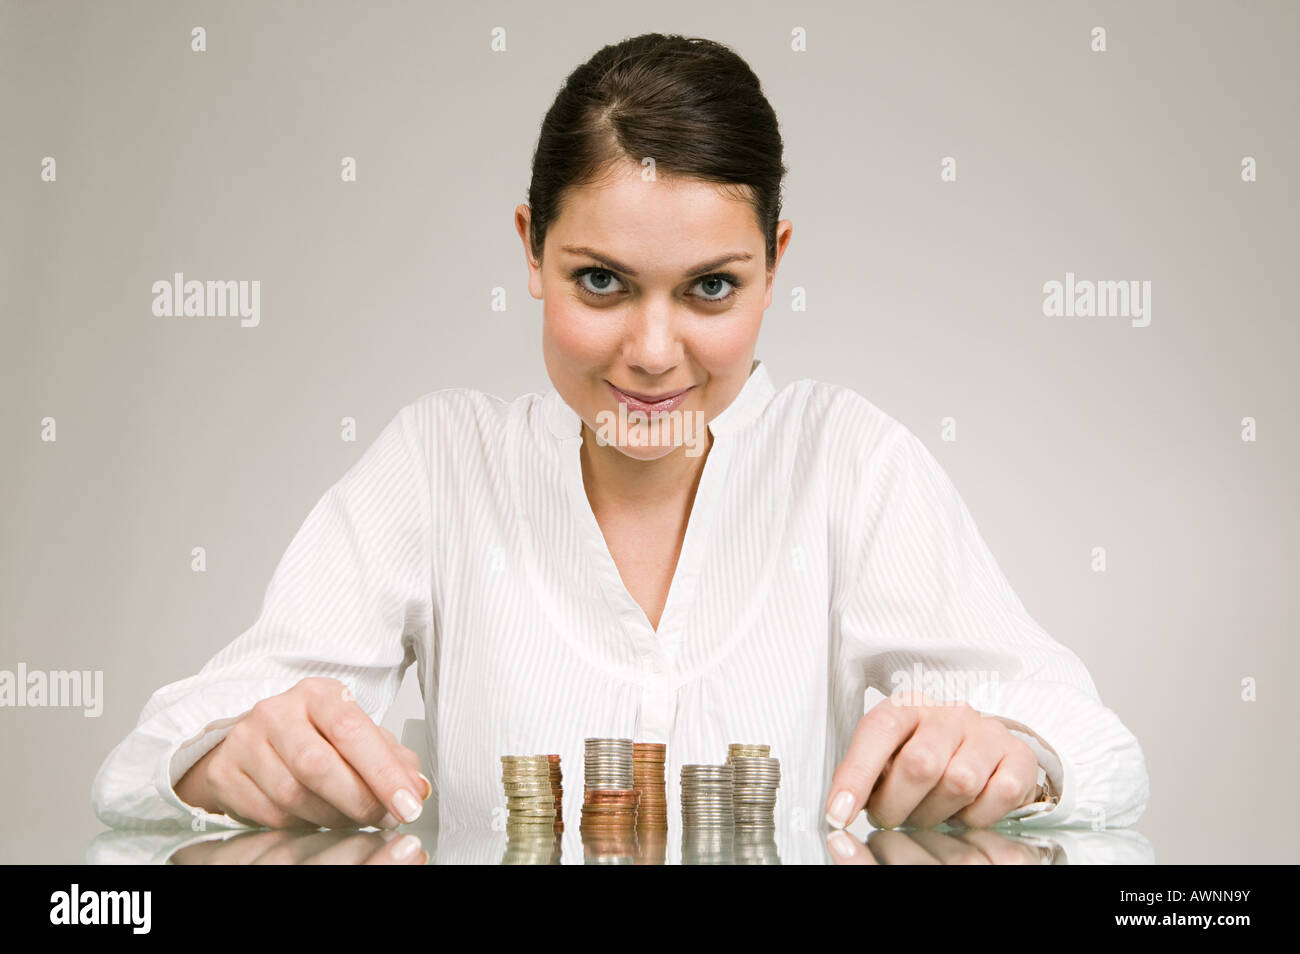 Woman with stacks of coins Stock Photo